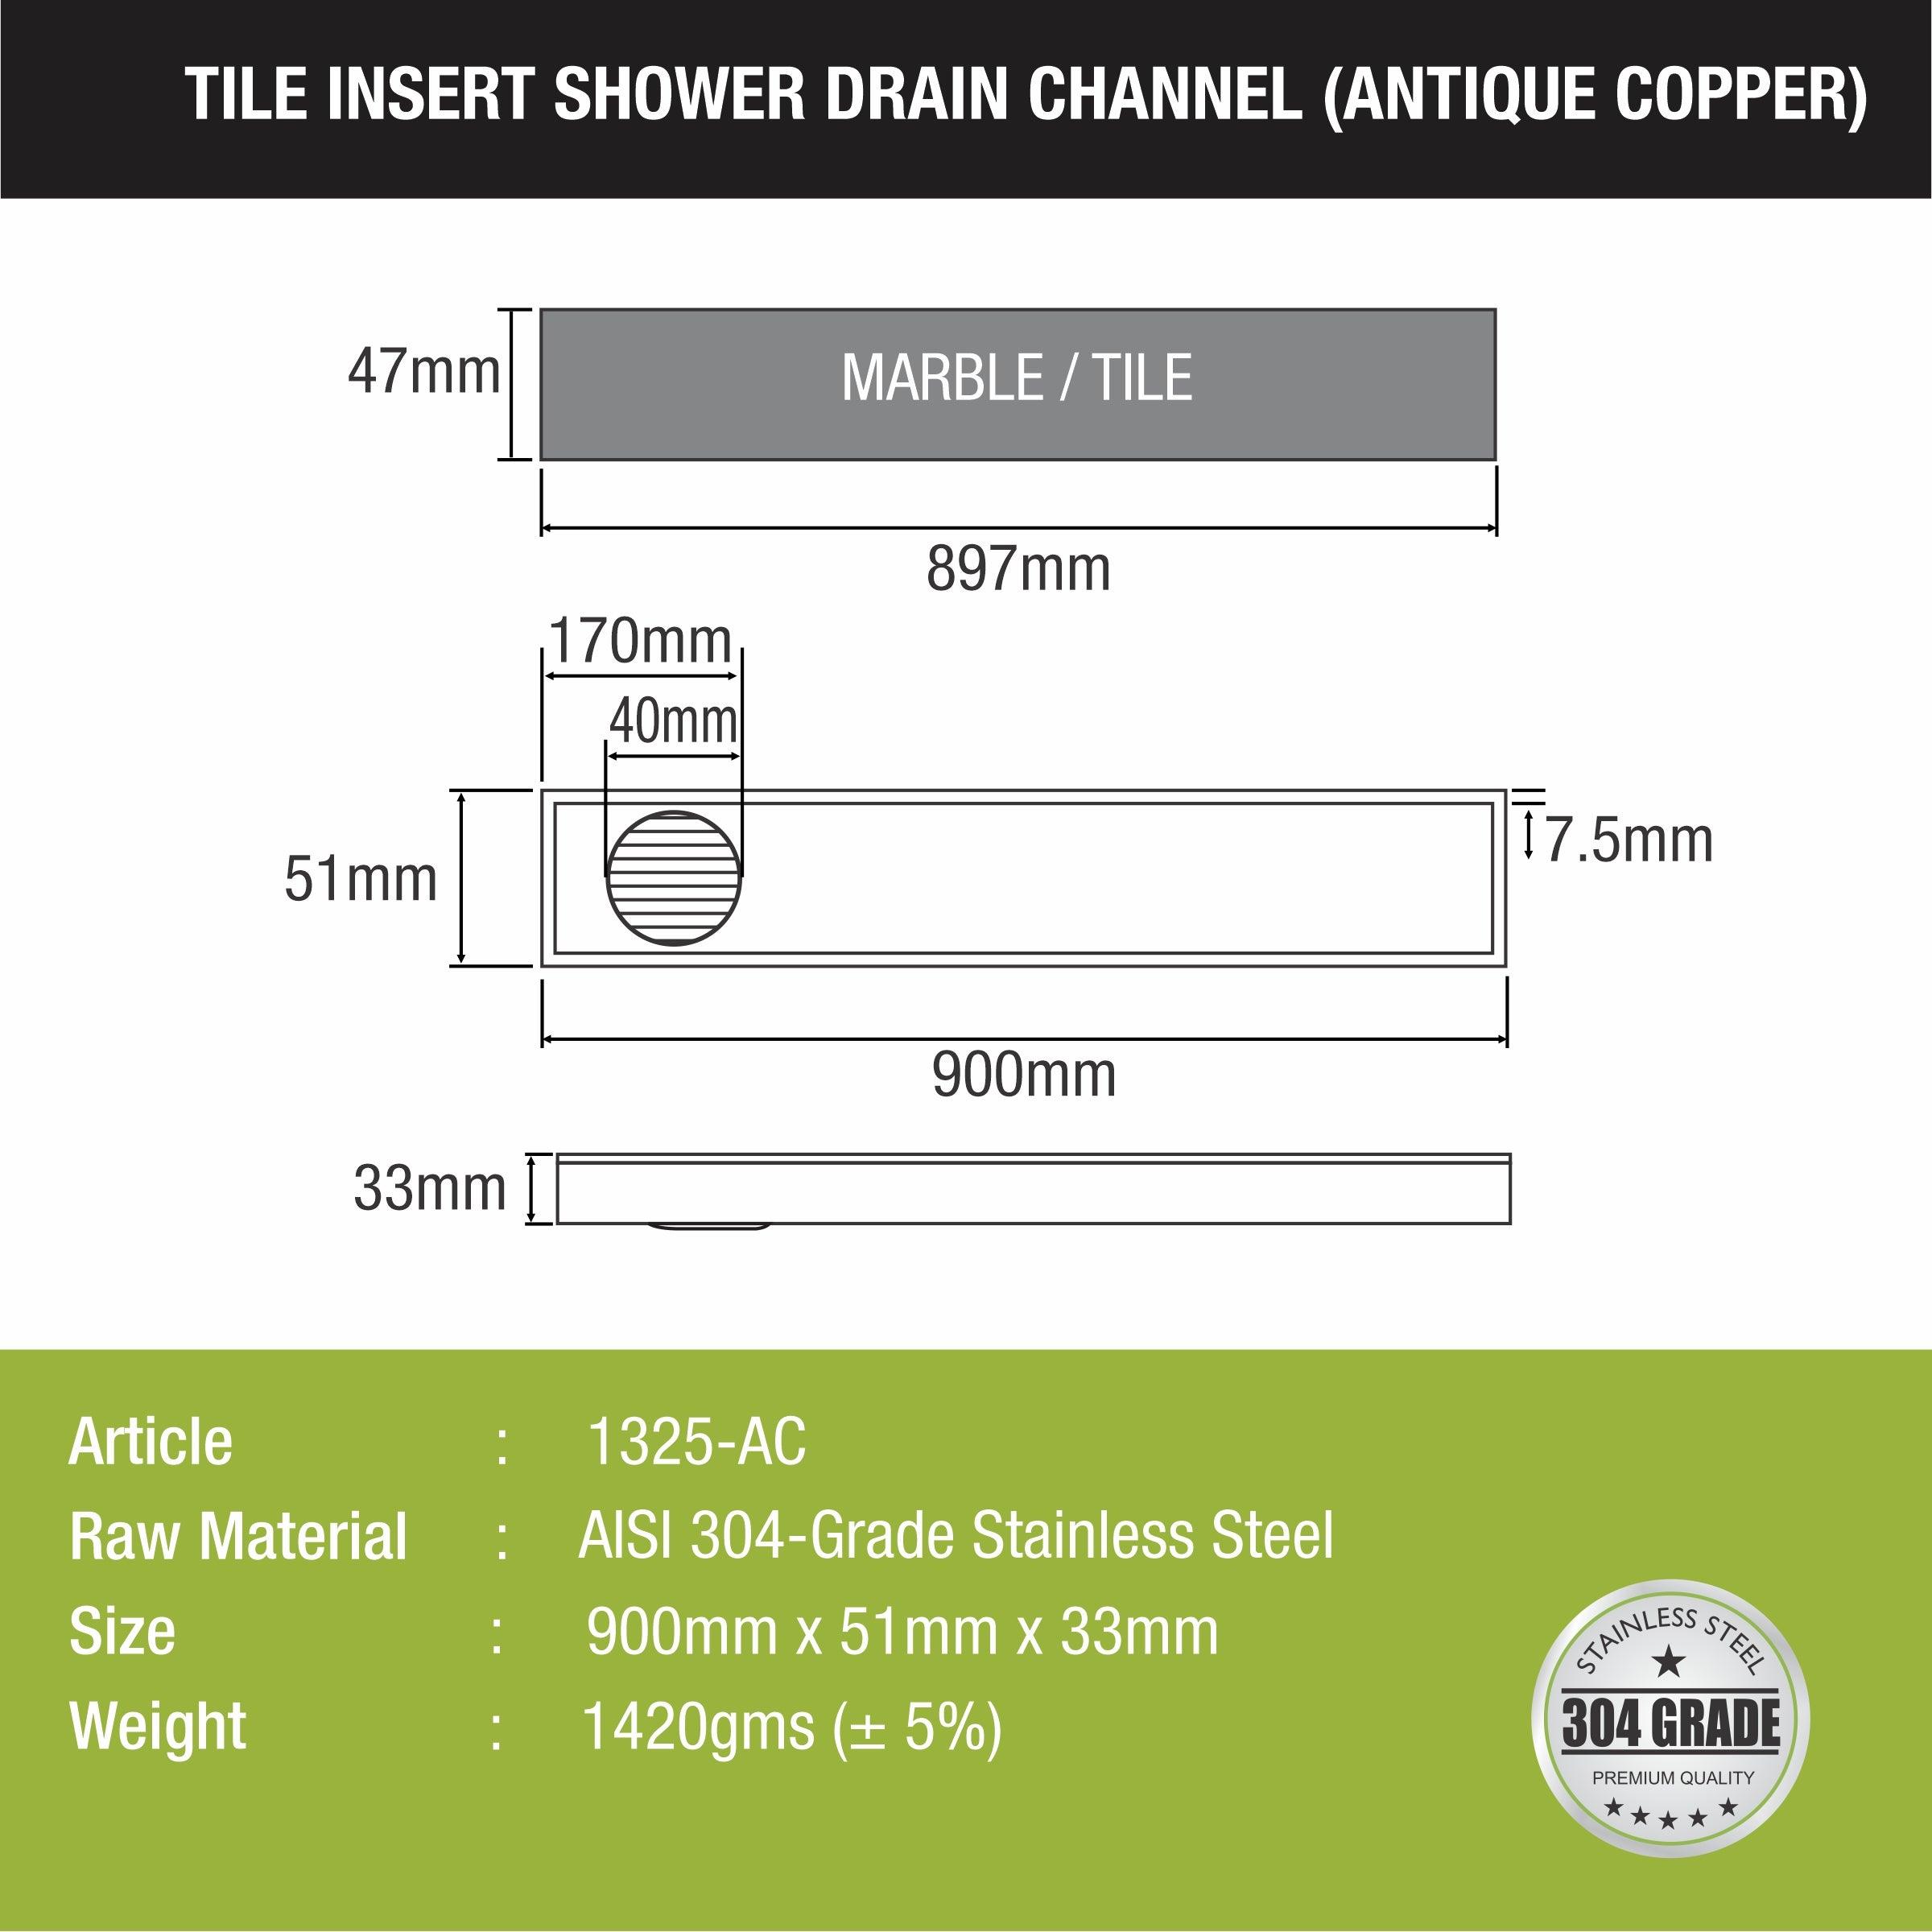 Tile Insert Shower Drain Channel - Antique Copper (36 x 2 Inches) sizes and dimensions